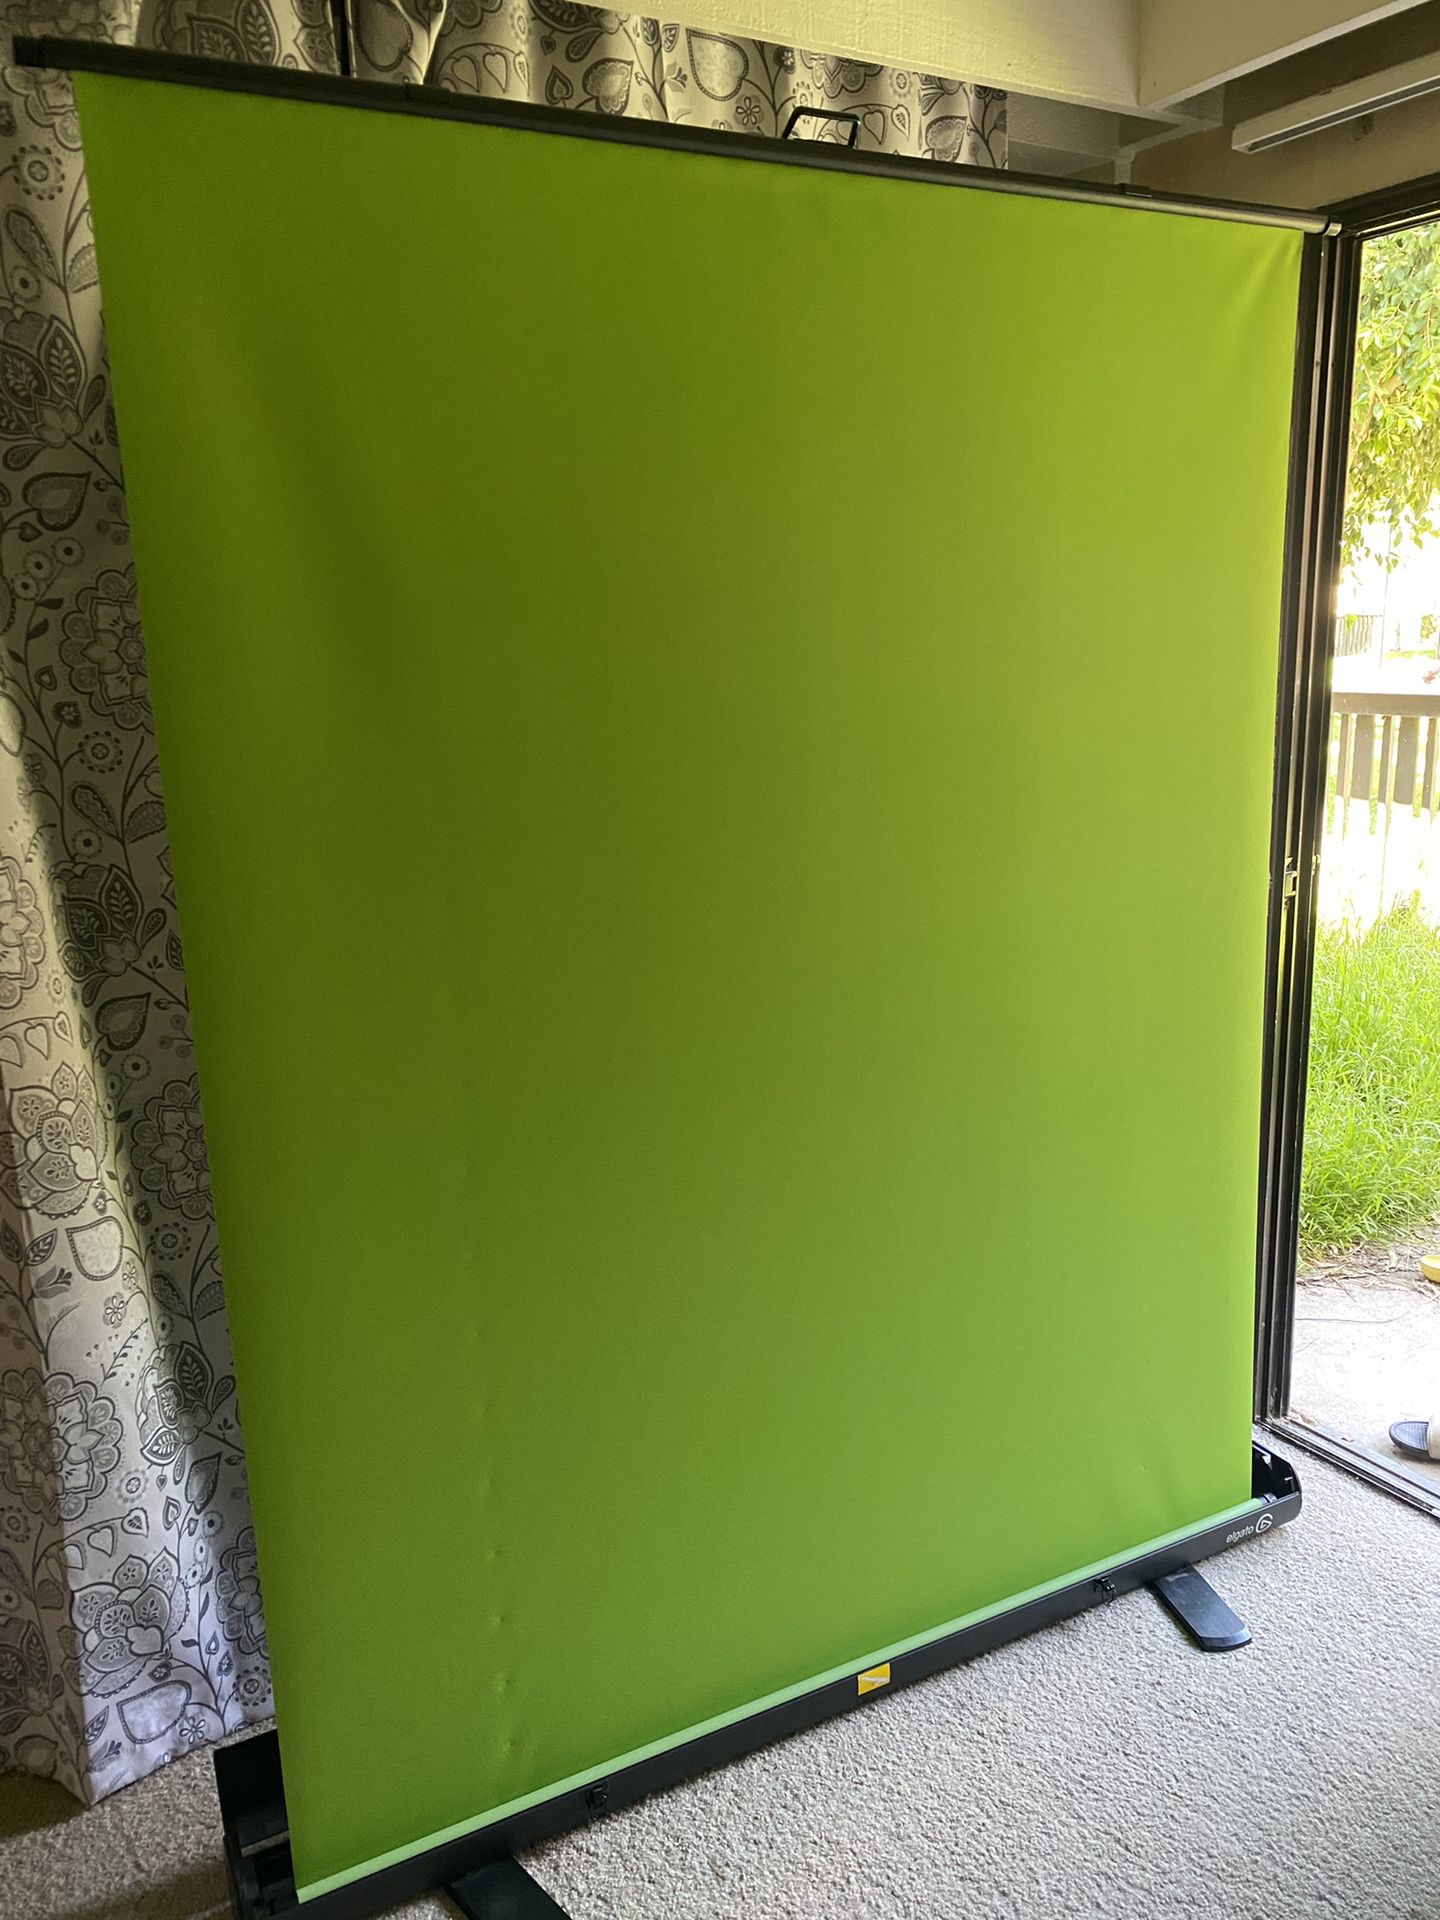 Elgato Green Screen ( Collapsible Chroma Key Panel ) for Sale in